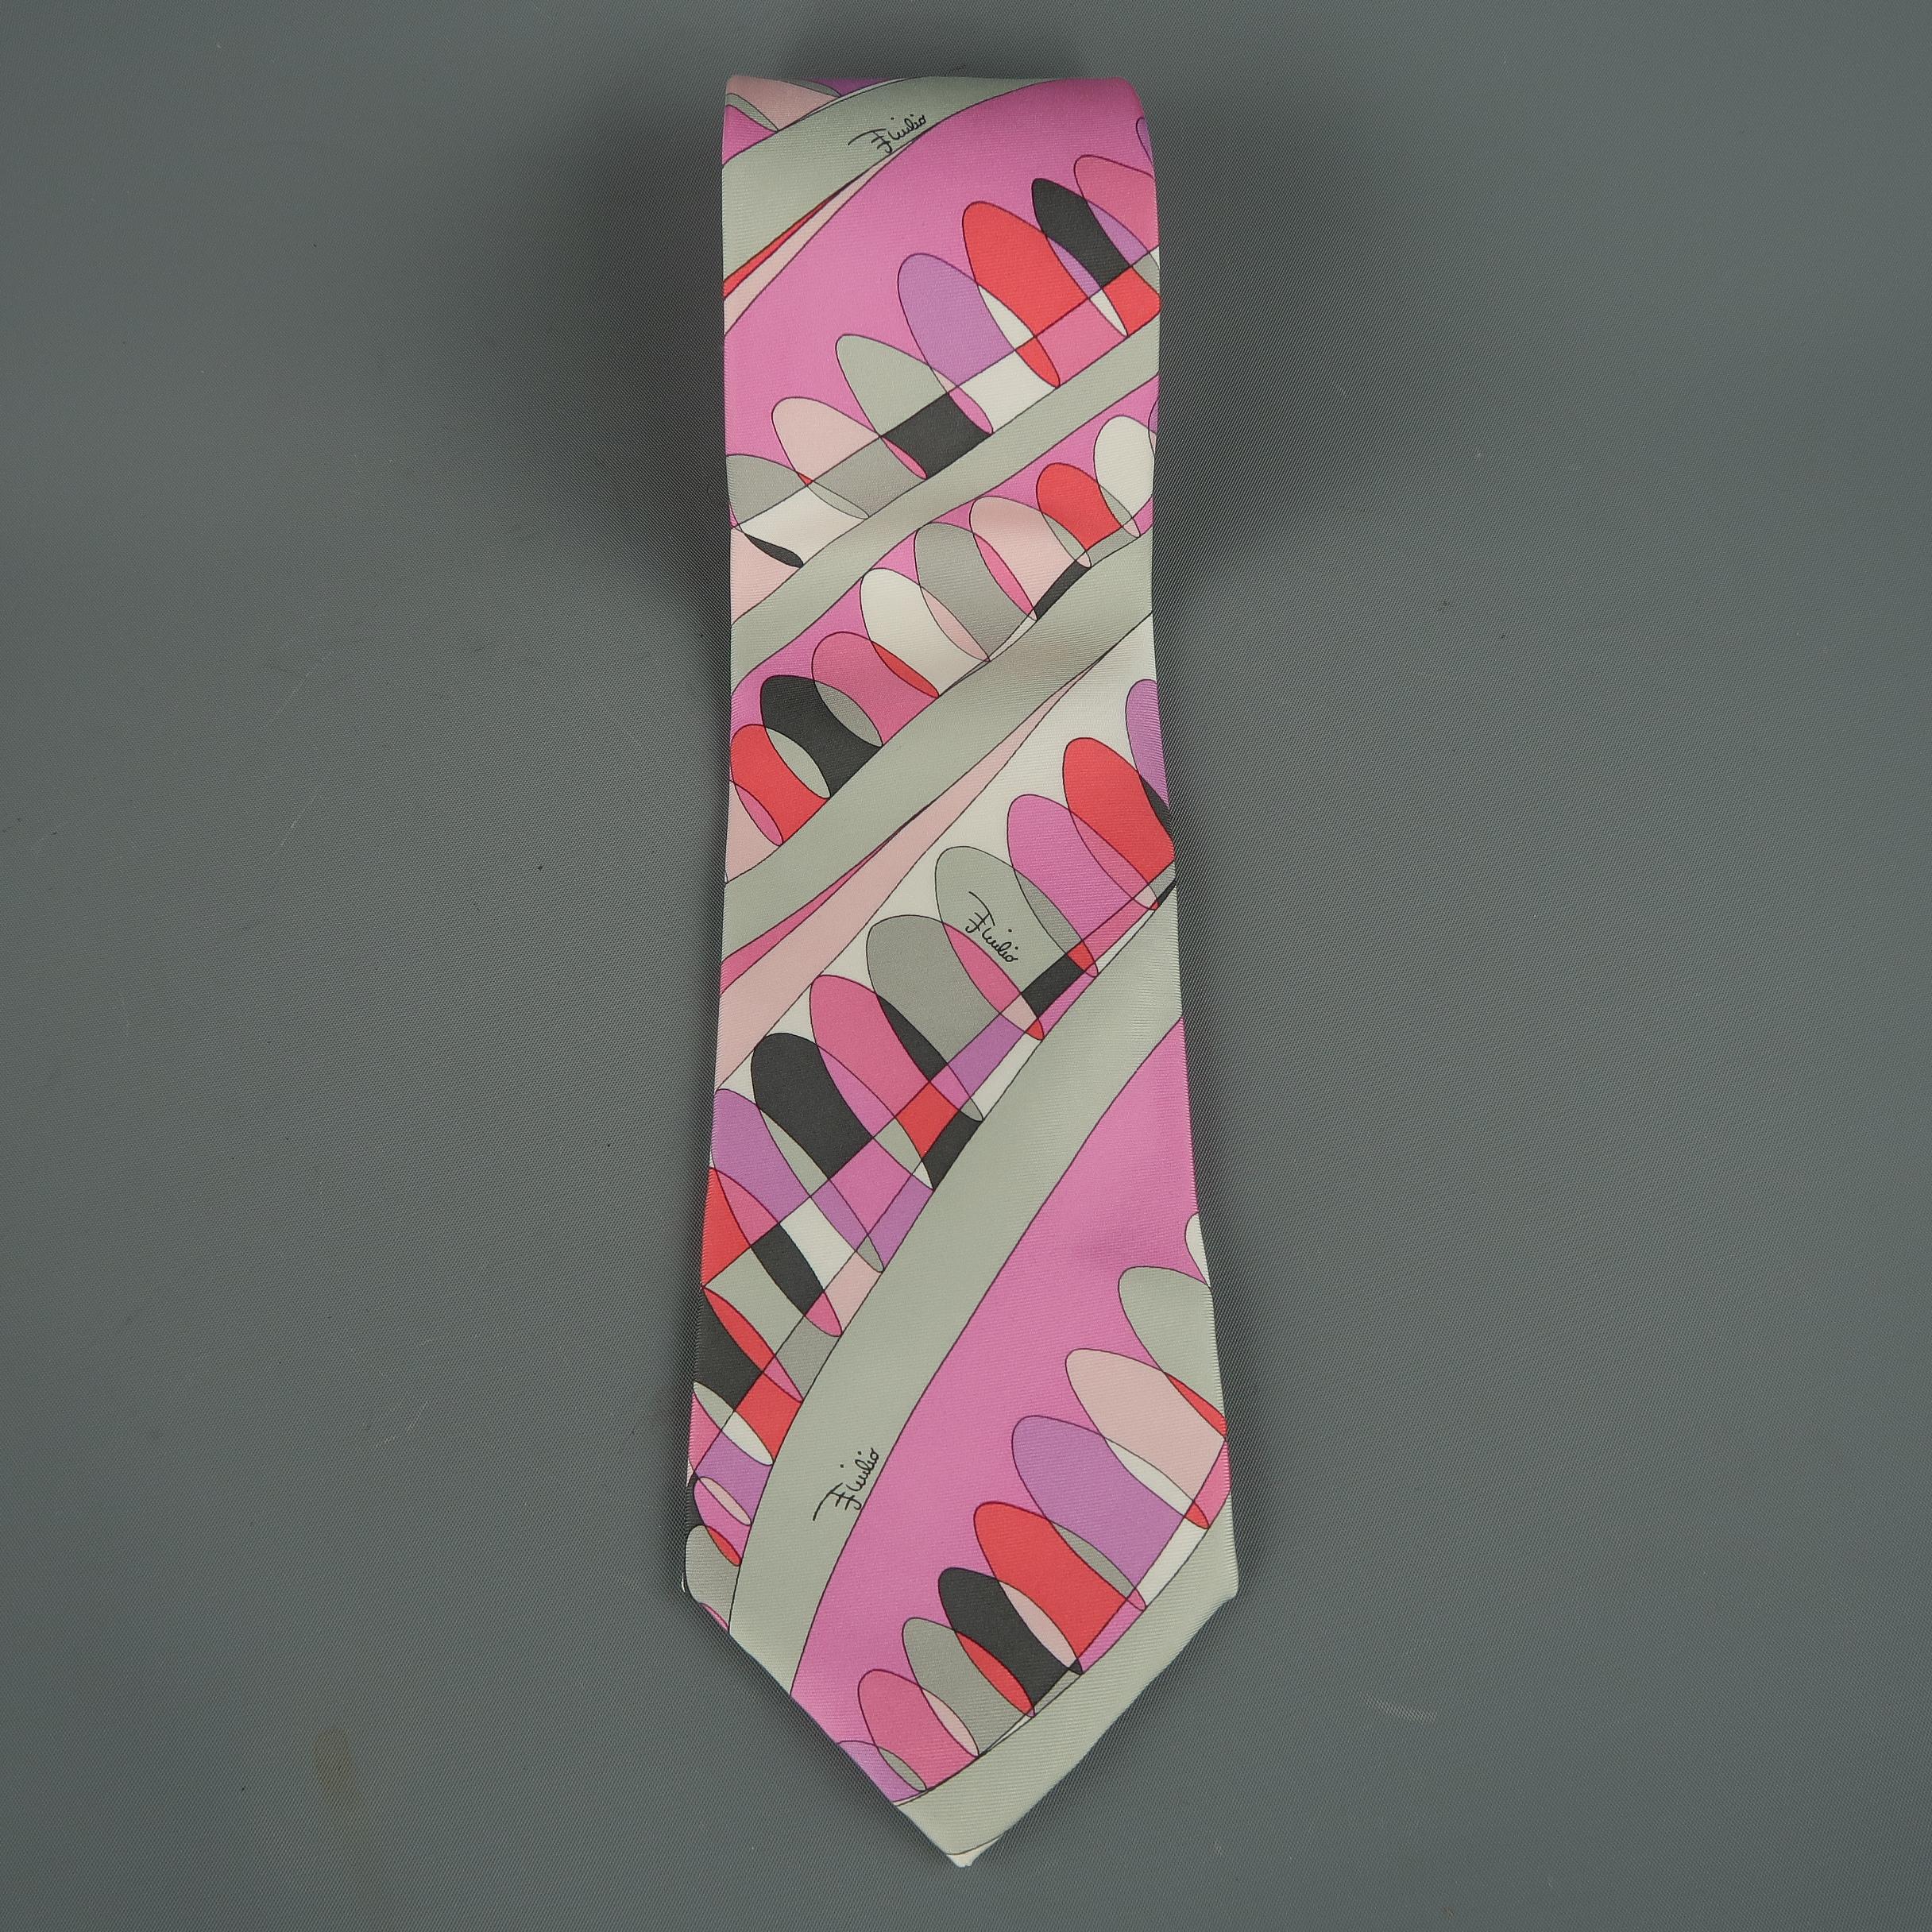 Emilio Pucci tie comes in silk twill with an all over signature print with hues of pinks, reds, and grays. Made in Italy.
 
Excellent Pre-Owned Condition.
 
Width: 3.5 in.